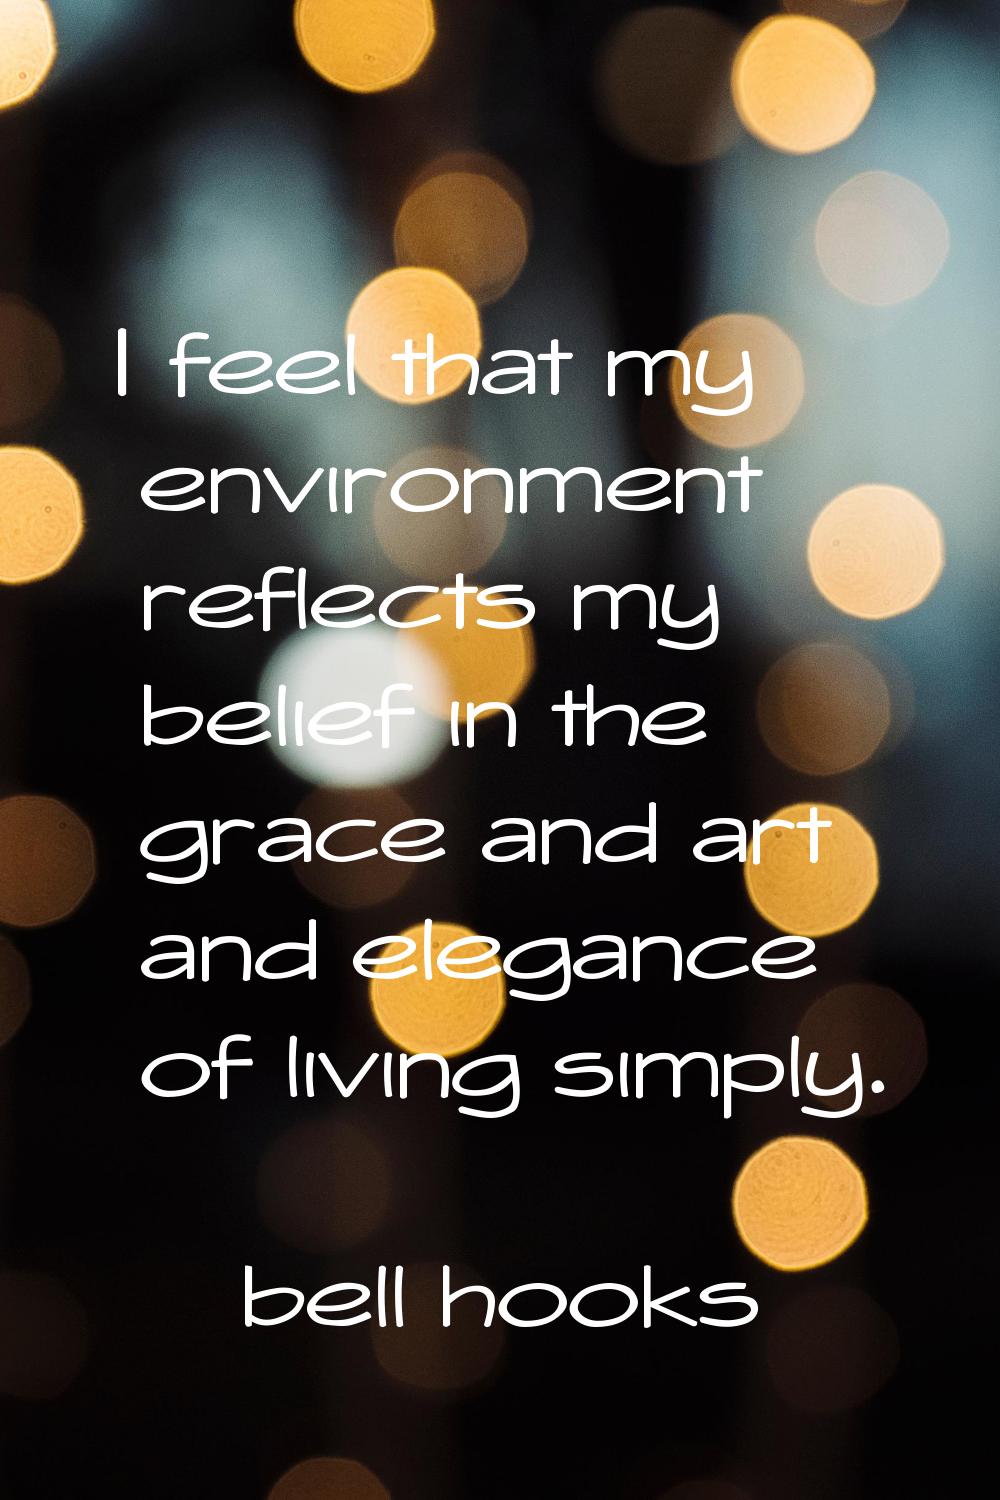 I feel that my environment reflects my belief in the grace and art and elegance of living simply.